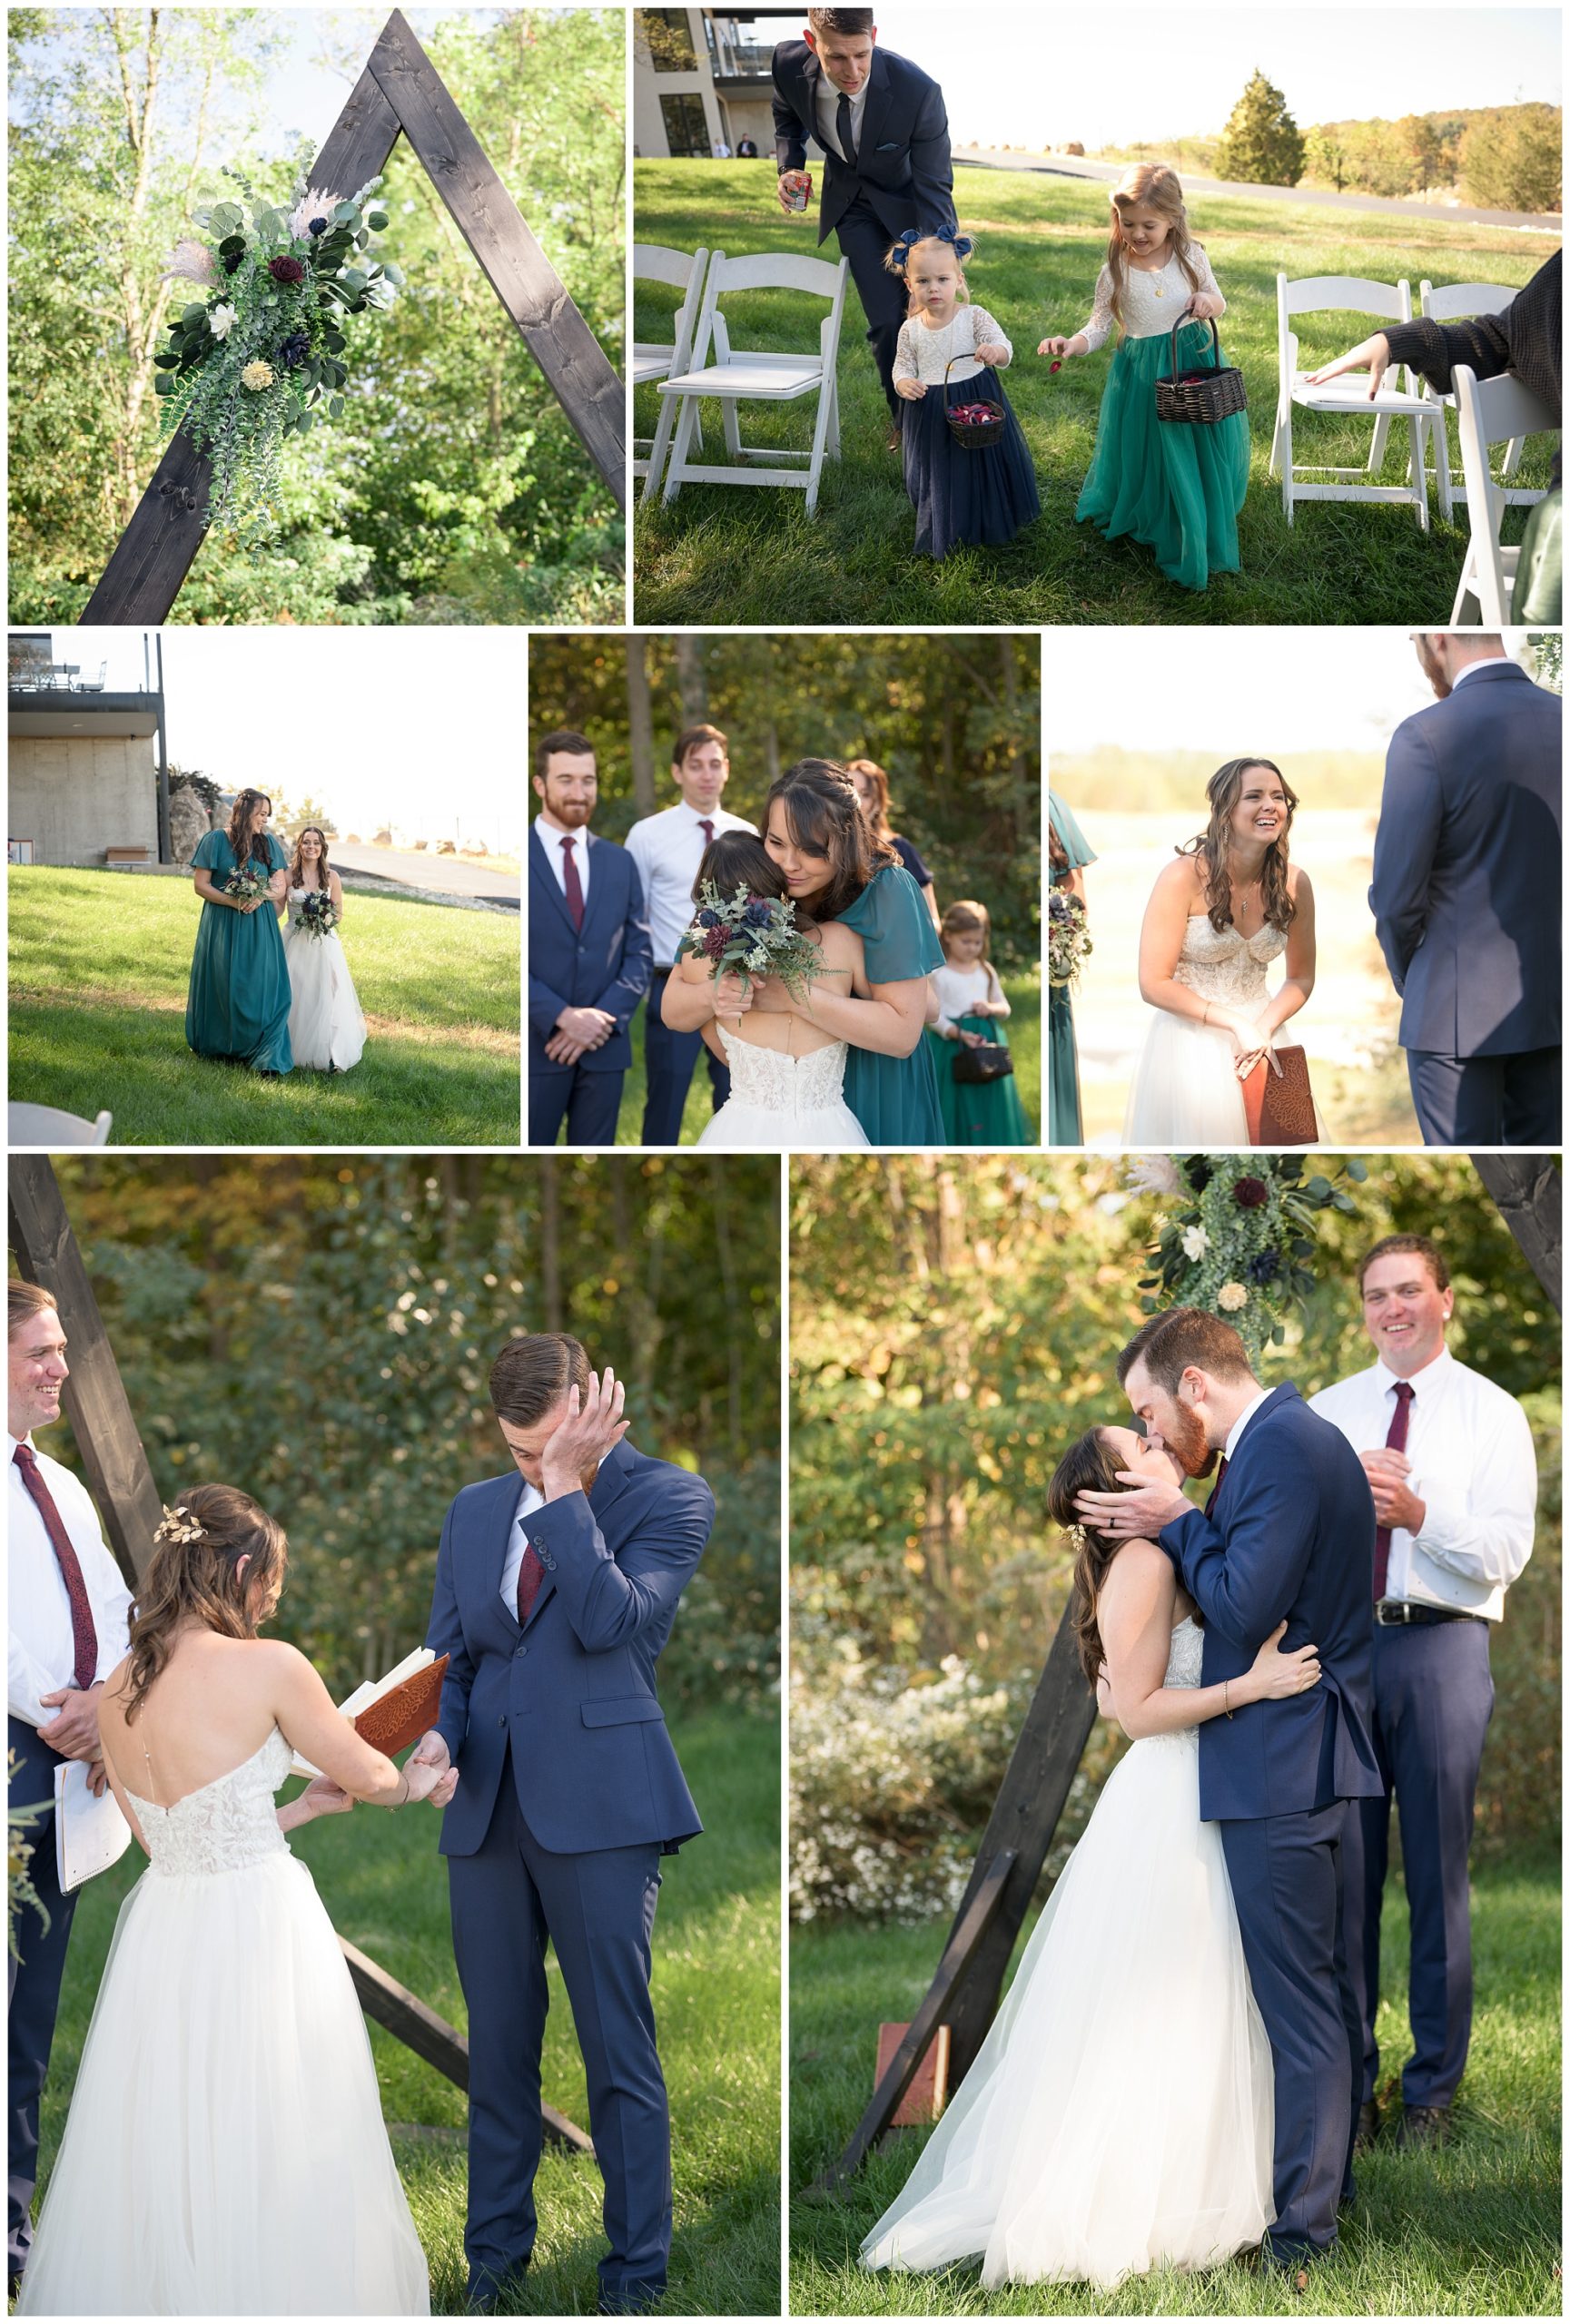 Series of images of the intimate outdoor wedding ceremony